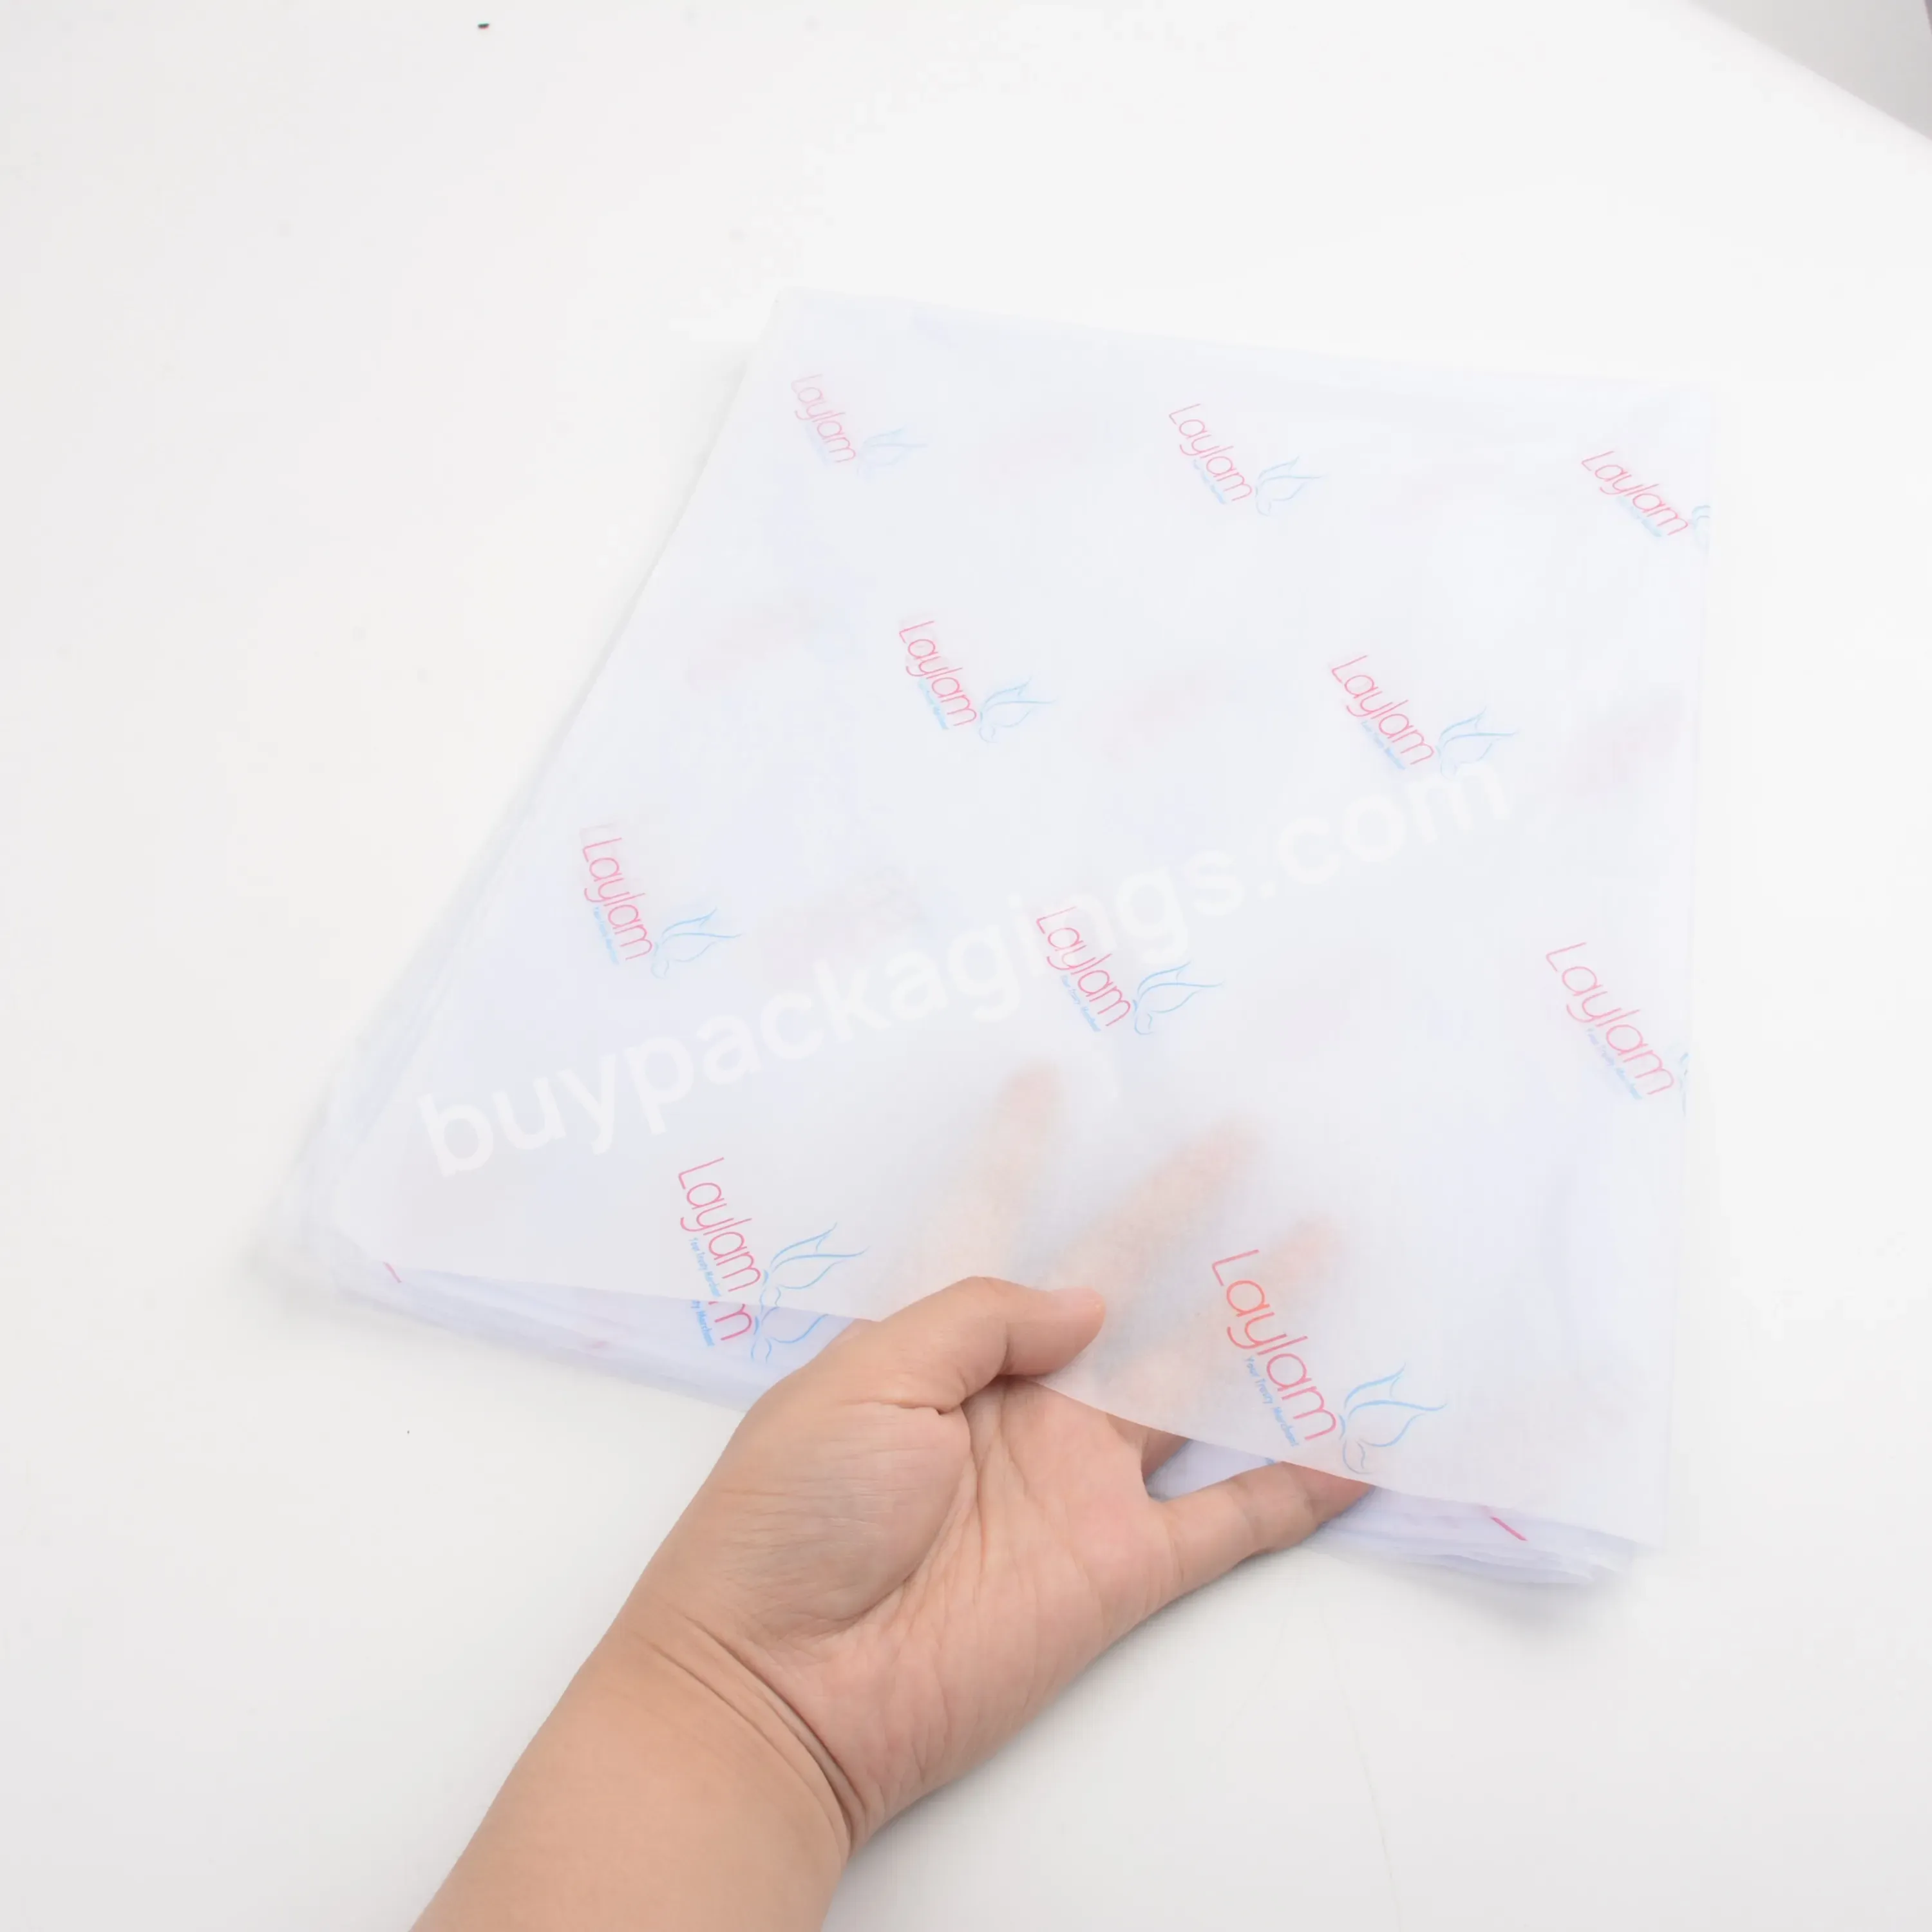 Recyclable Wrapping Tissue Paper For Clothes/flowers/gifts Custom Own Brand Logo Packaging Tissue Paper - Buy Wrapping Clothing/flower/gift,Multiple Color Options,Customized Logo And Size.